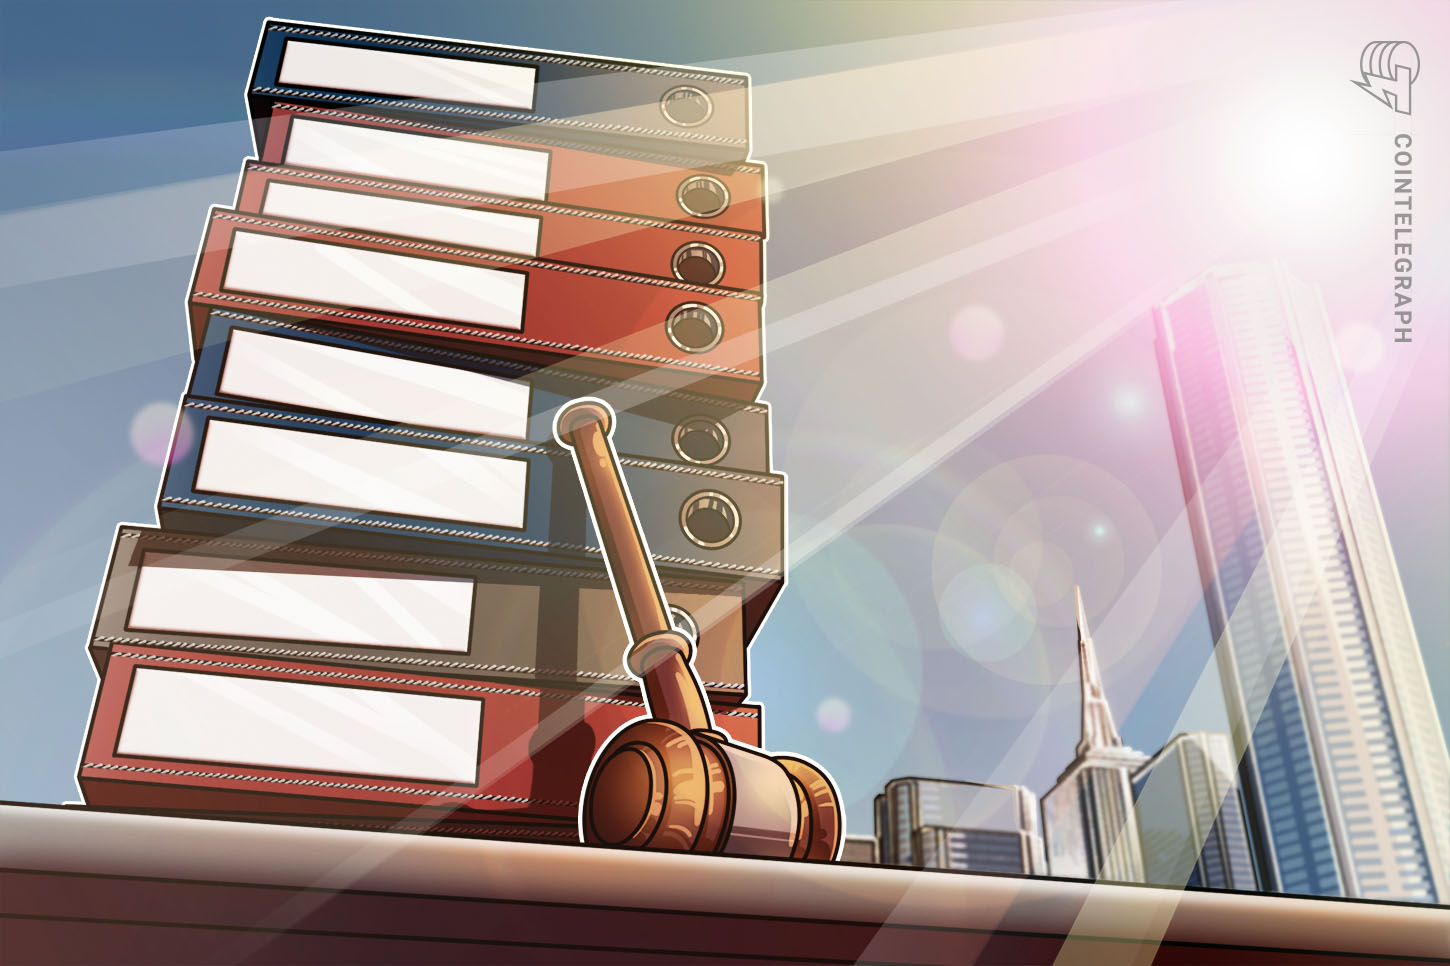 Bitcoin Mining Agency Layer1 Accused of Copyright Infringement